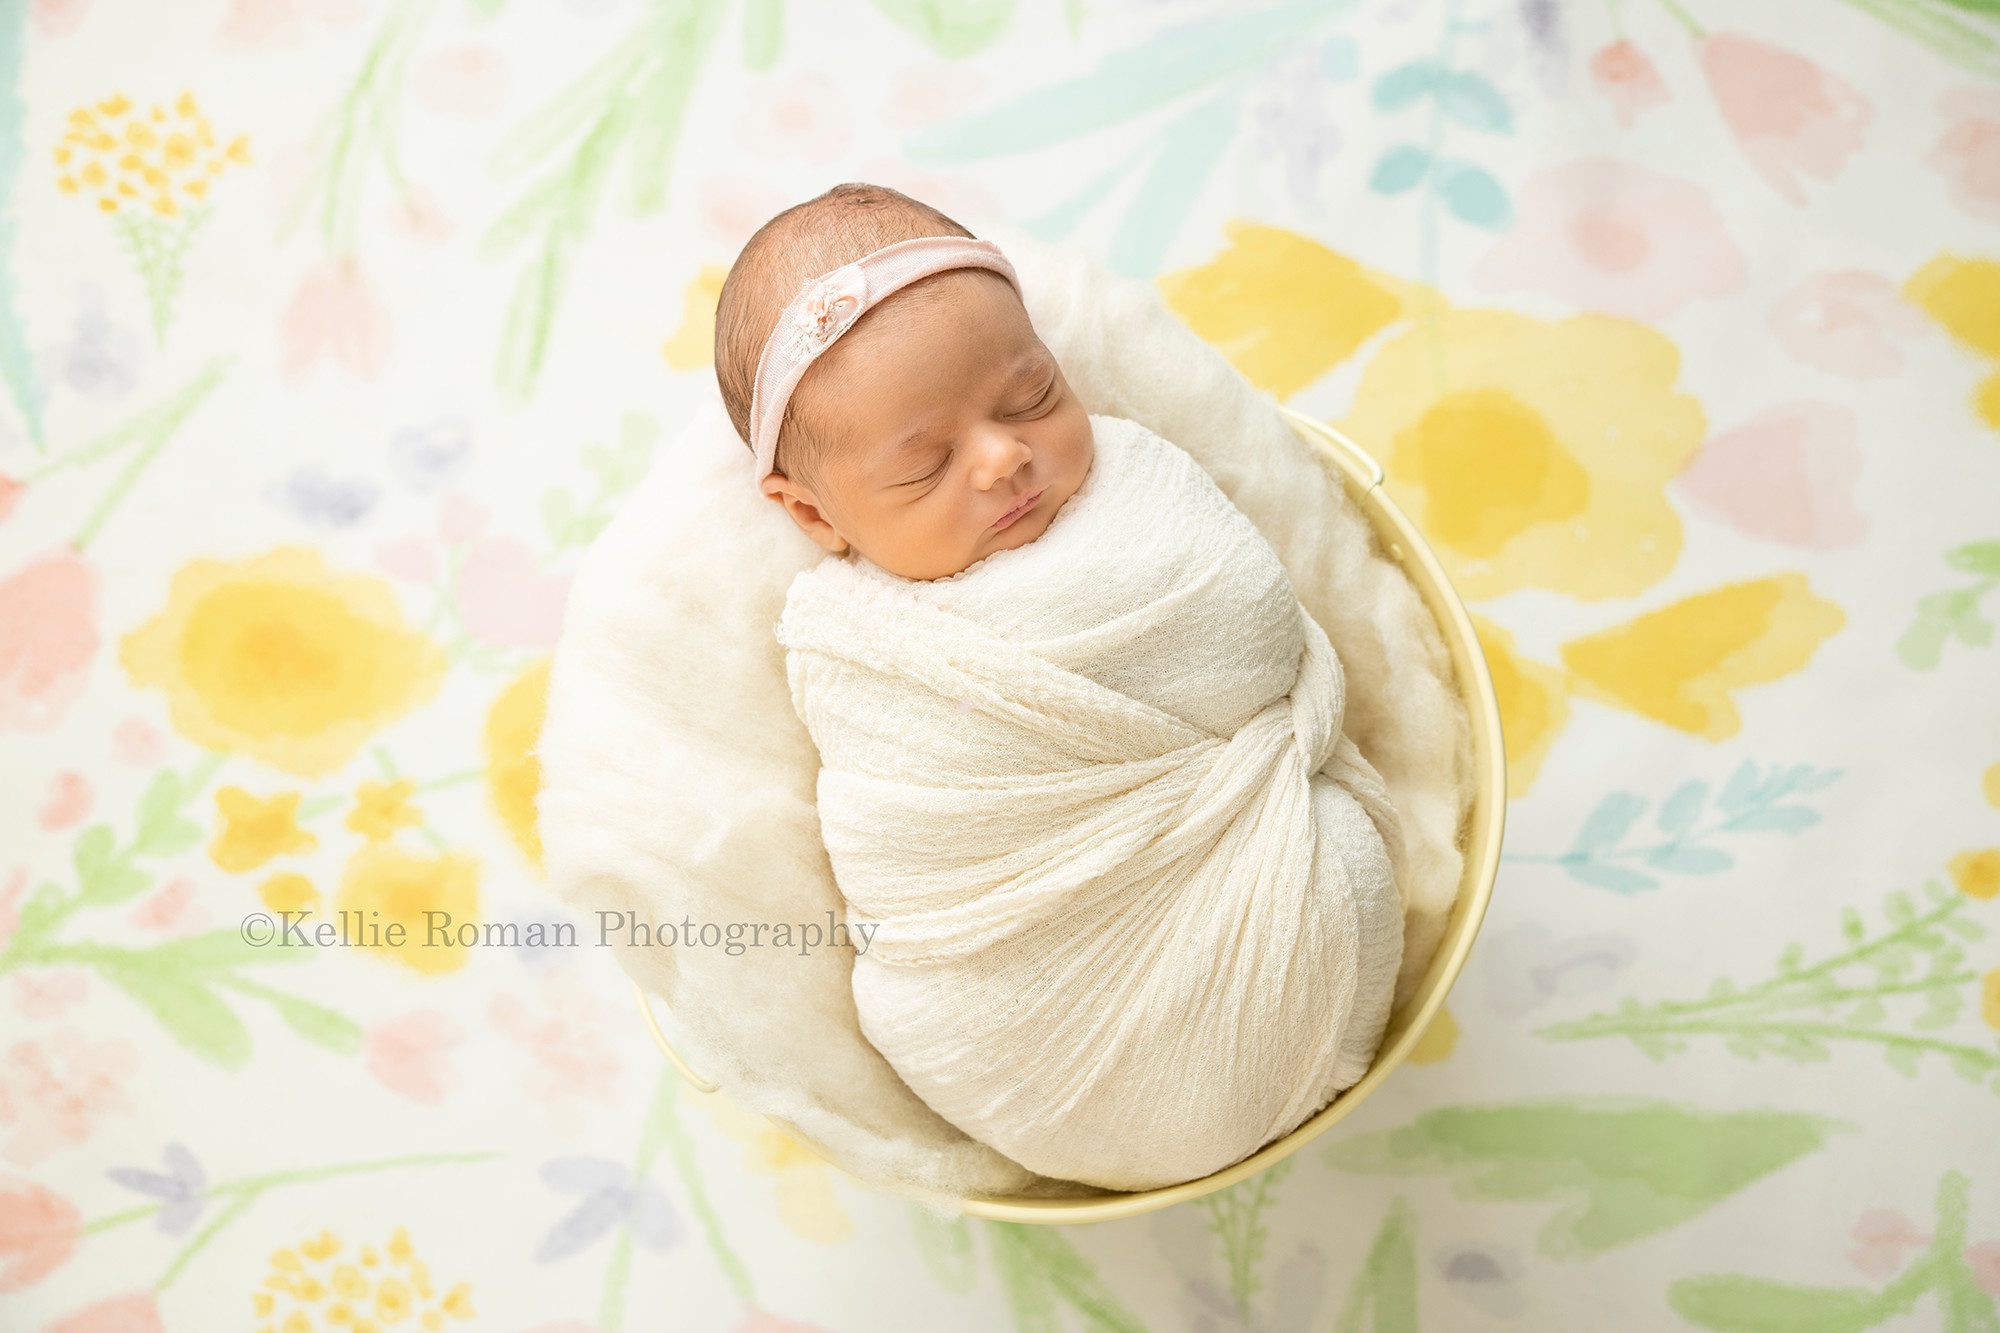 perfect newborn girl a baby newborn girl wrapped in an ivory swaddle fabric laying in a yellow metal bucket she has a headband on and the bucket she's in is onto of a floral backdrop her parents are from Madison Wisconsin